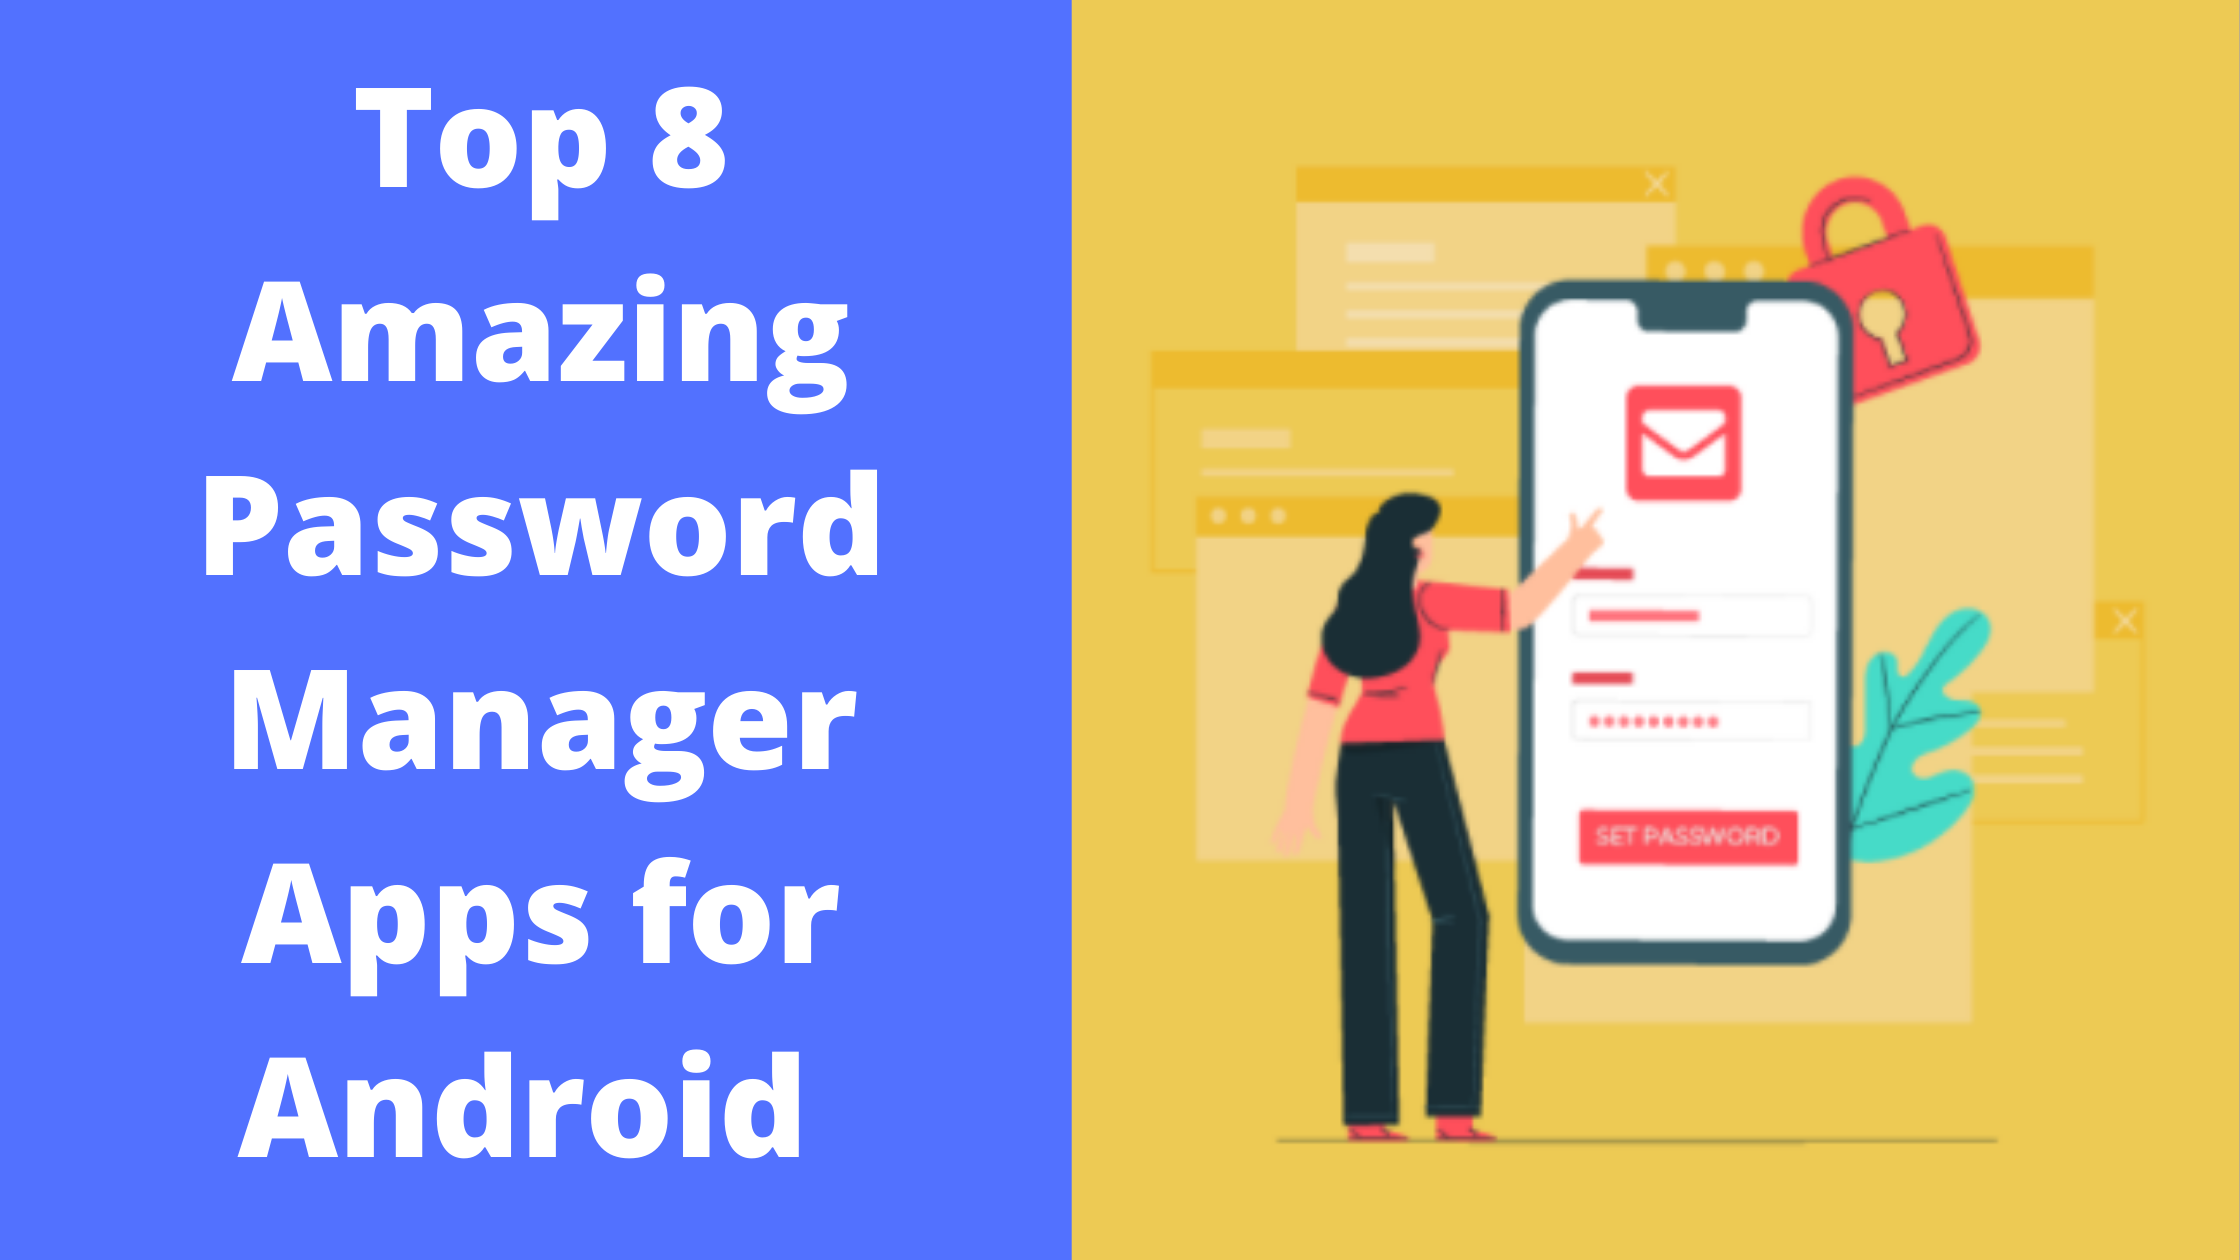 Top 8 Amazing Password Manager Apps for Android